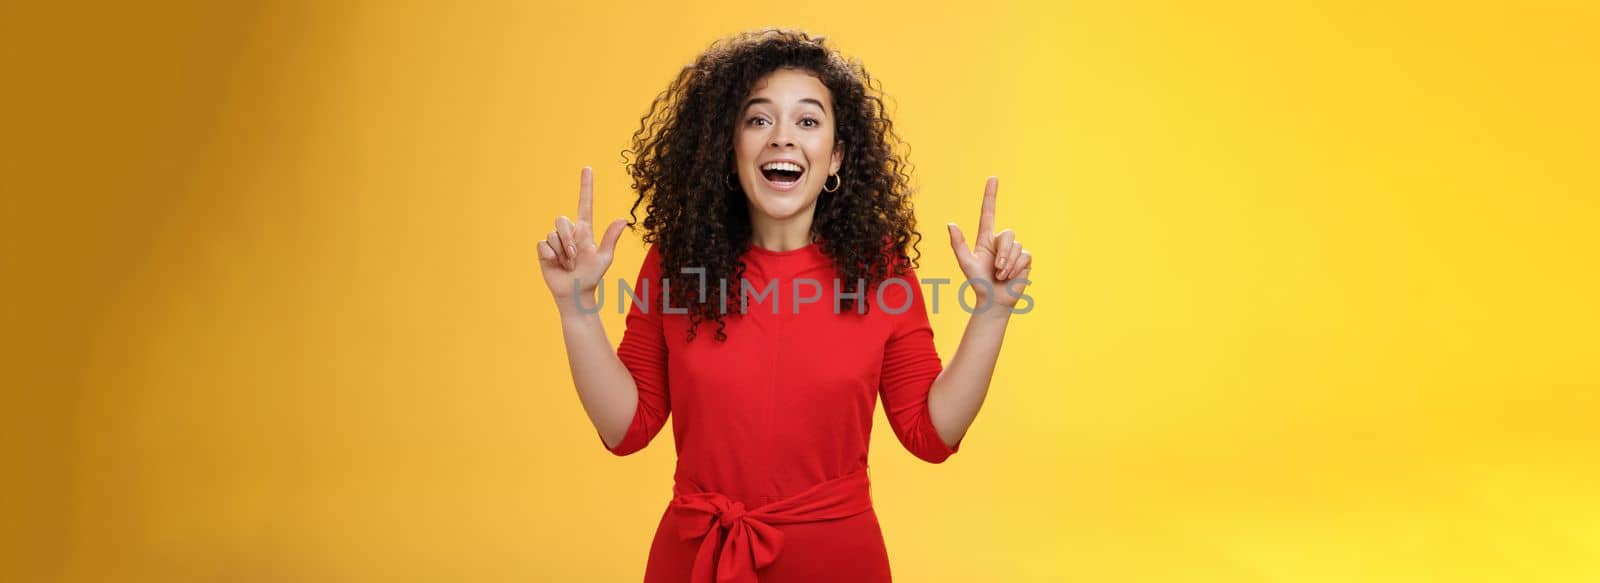 Enthusiastic happy curly-haired young european woman feeling happy present awesome copy space, raising hands pointing up and smiling with delight and admiration over yellow background.